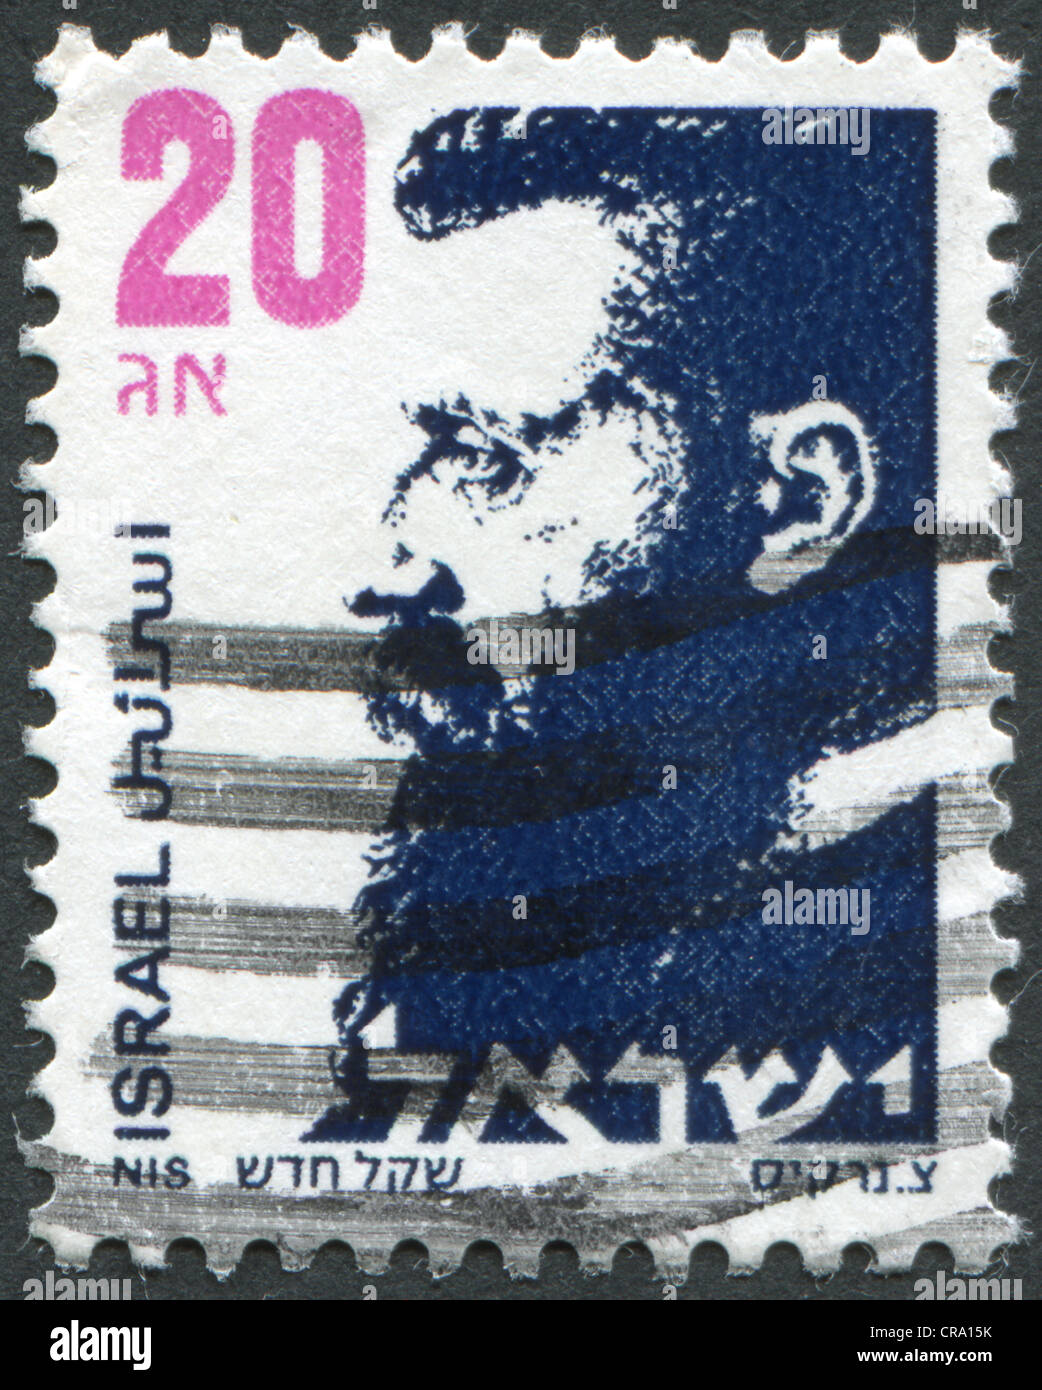 ISRAEL - CIRCA 1986: A stamp printed in the Israel, depicts Theodor Herzl, circa 1986 Stock Photo